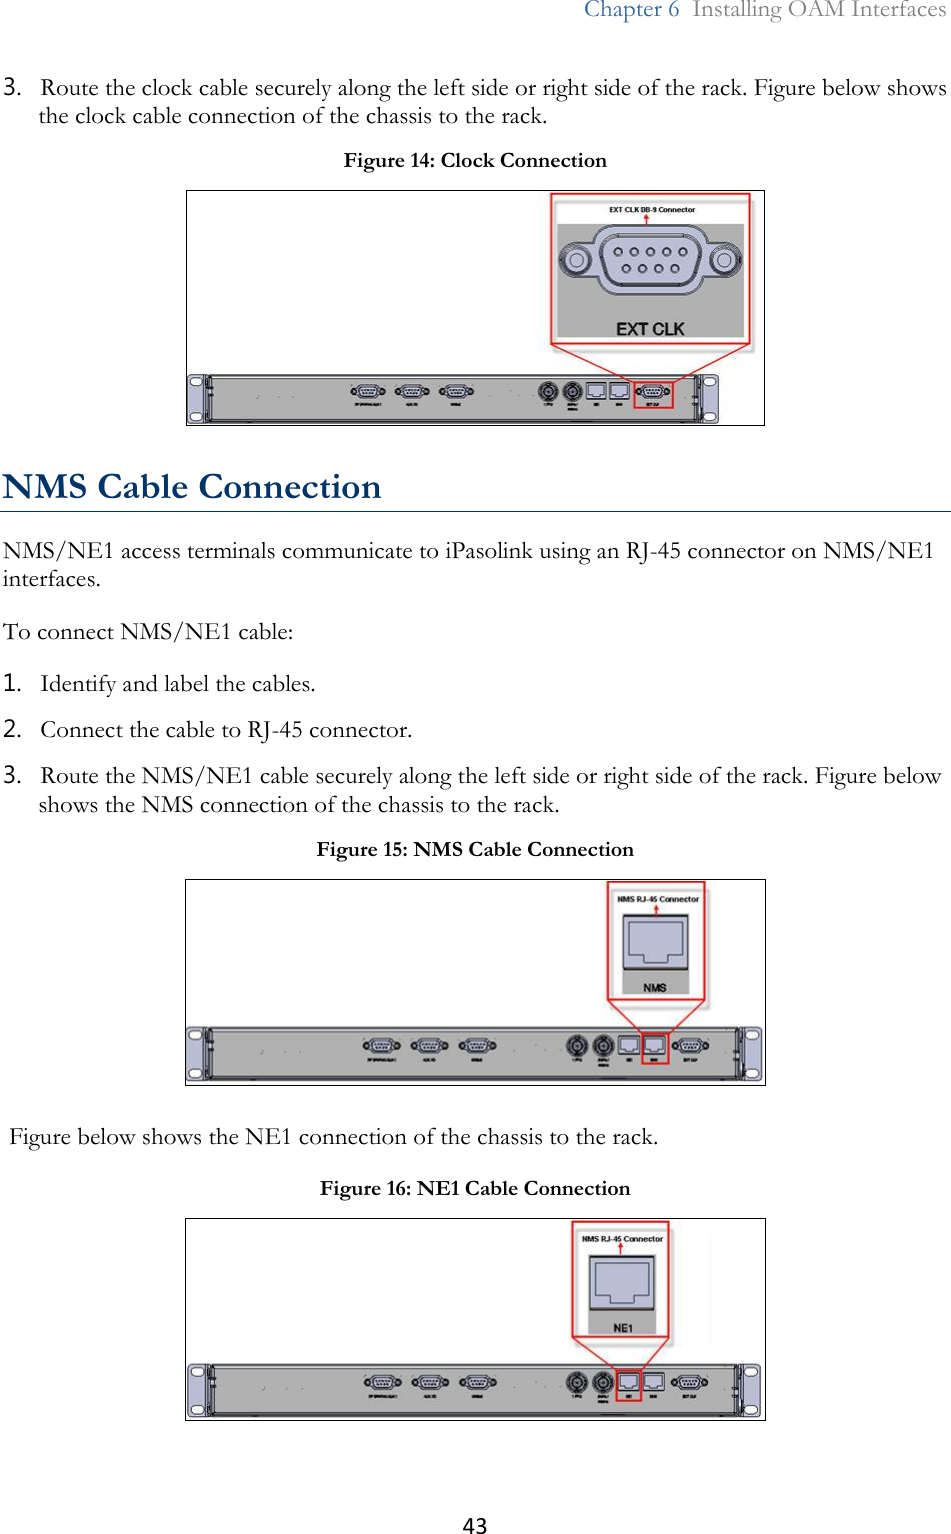 43  Chapter 6  Installing OAM Interfaces  3. Route the clock cable securely along the left side or right side of the rack. Figure below shows the clock cable connection of the chassis to the rack.  NMS Cable Connection NMS/NE1 access terminals communicate to iPasolink using an RJ-45 connector on NMS/NE1 interfaces. To connect NMS/NE1 cable: 1. Identify and label the cables. 2. Connect the cable to RJ-45 connector. 3. Route the NMS/NE1 cable securely along the left side or right side of the rack. Figure below shows the NMS connection of the chassis to the rack.  Figure below shows the NE1 connection of the chassis to the rack.  Figure 14: Clock Connection  Figure 15: NMS Cable Connection  Figure 16: NE1 Cable Connection  